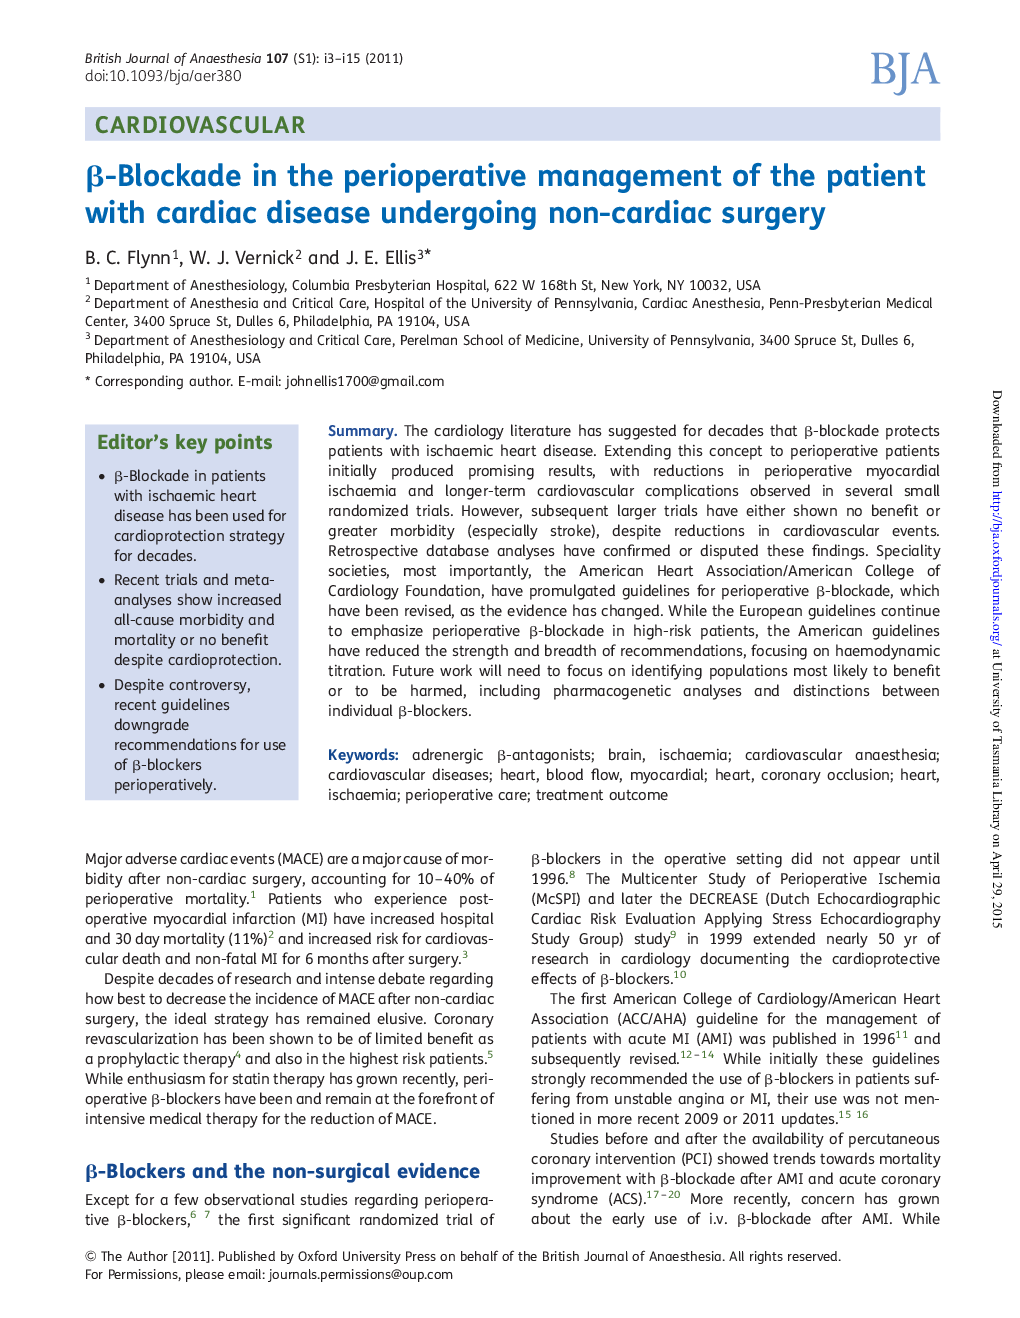 Î²-Blockade in the perioperative management of the patient with cardiac disease undergoing non-cardiac surgery